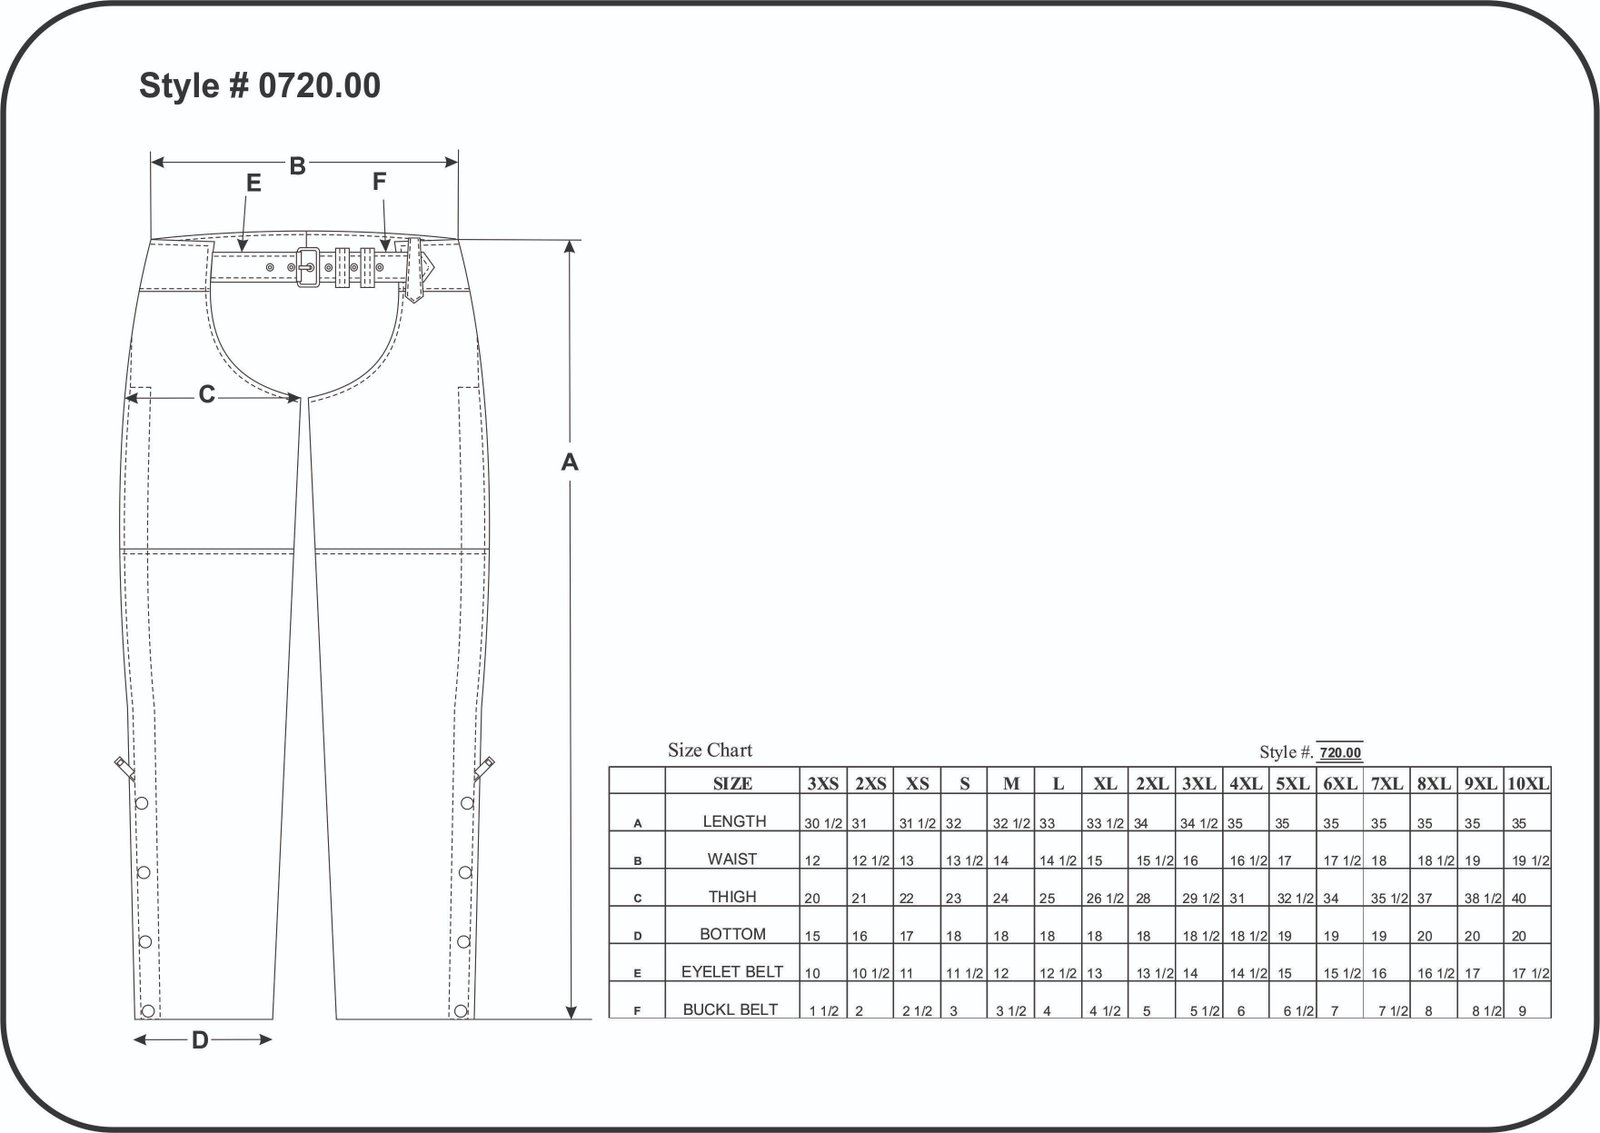 Size chart for men's women's unisex leather motorcycle chaps from Unik.